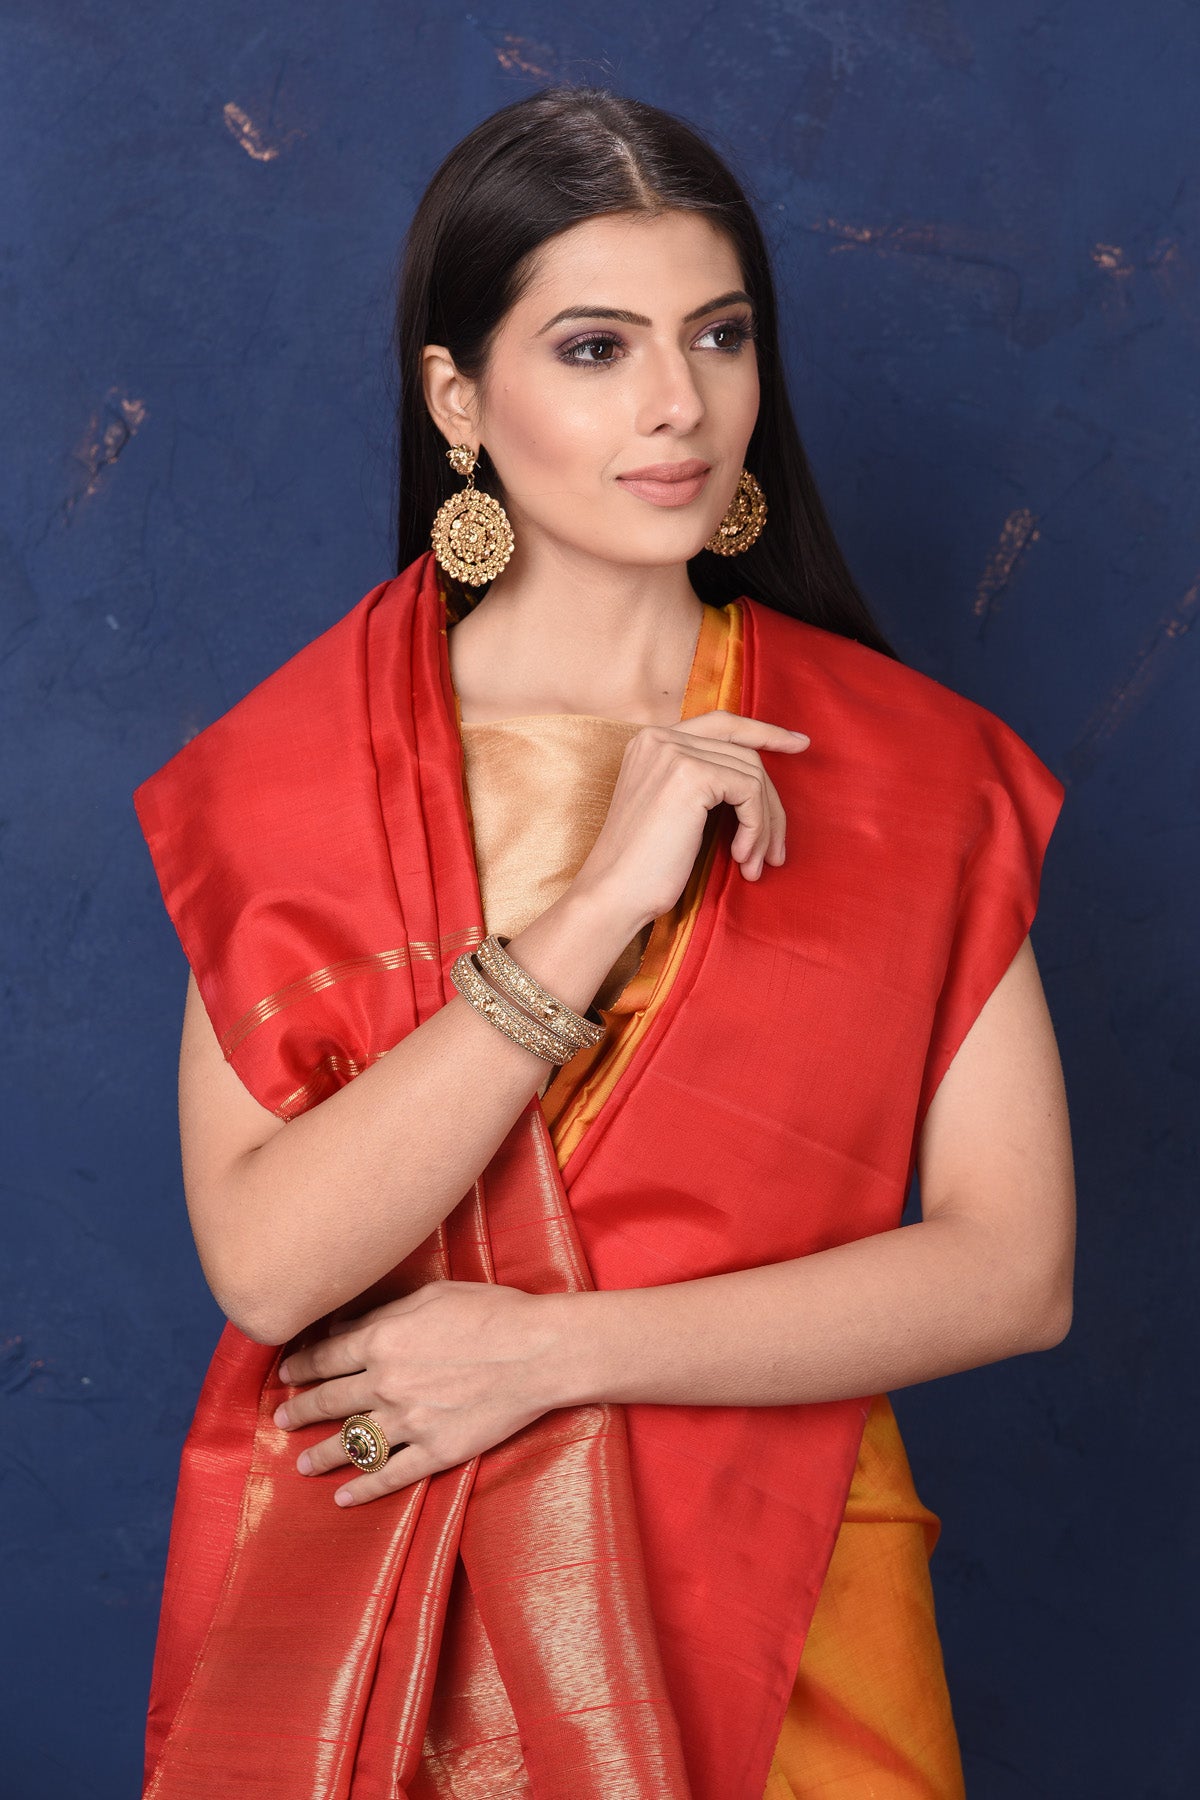 Buy beautiful orange Kanjivaram silk saree online in USA with red temple border. Flaunt your ethnic style at weddings and festive occasions in exquisite Indian sarees, Kanjeevaram sarees, handloom sarees, designer sarees, embroidered sarees from Pure Elegance Indian saree store in USA.-closeup